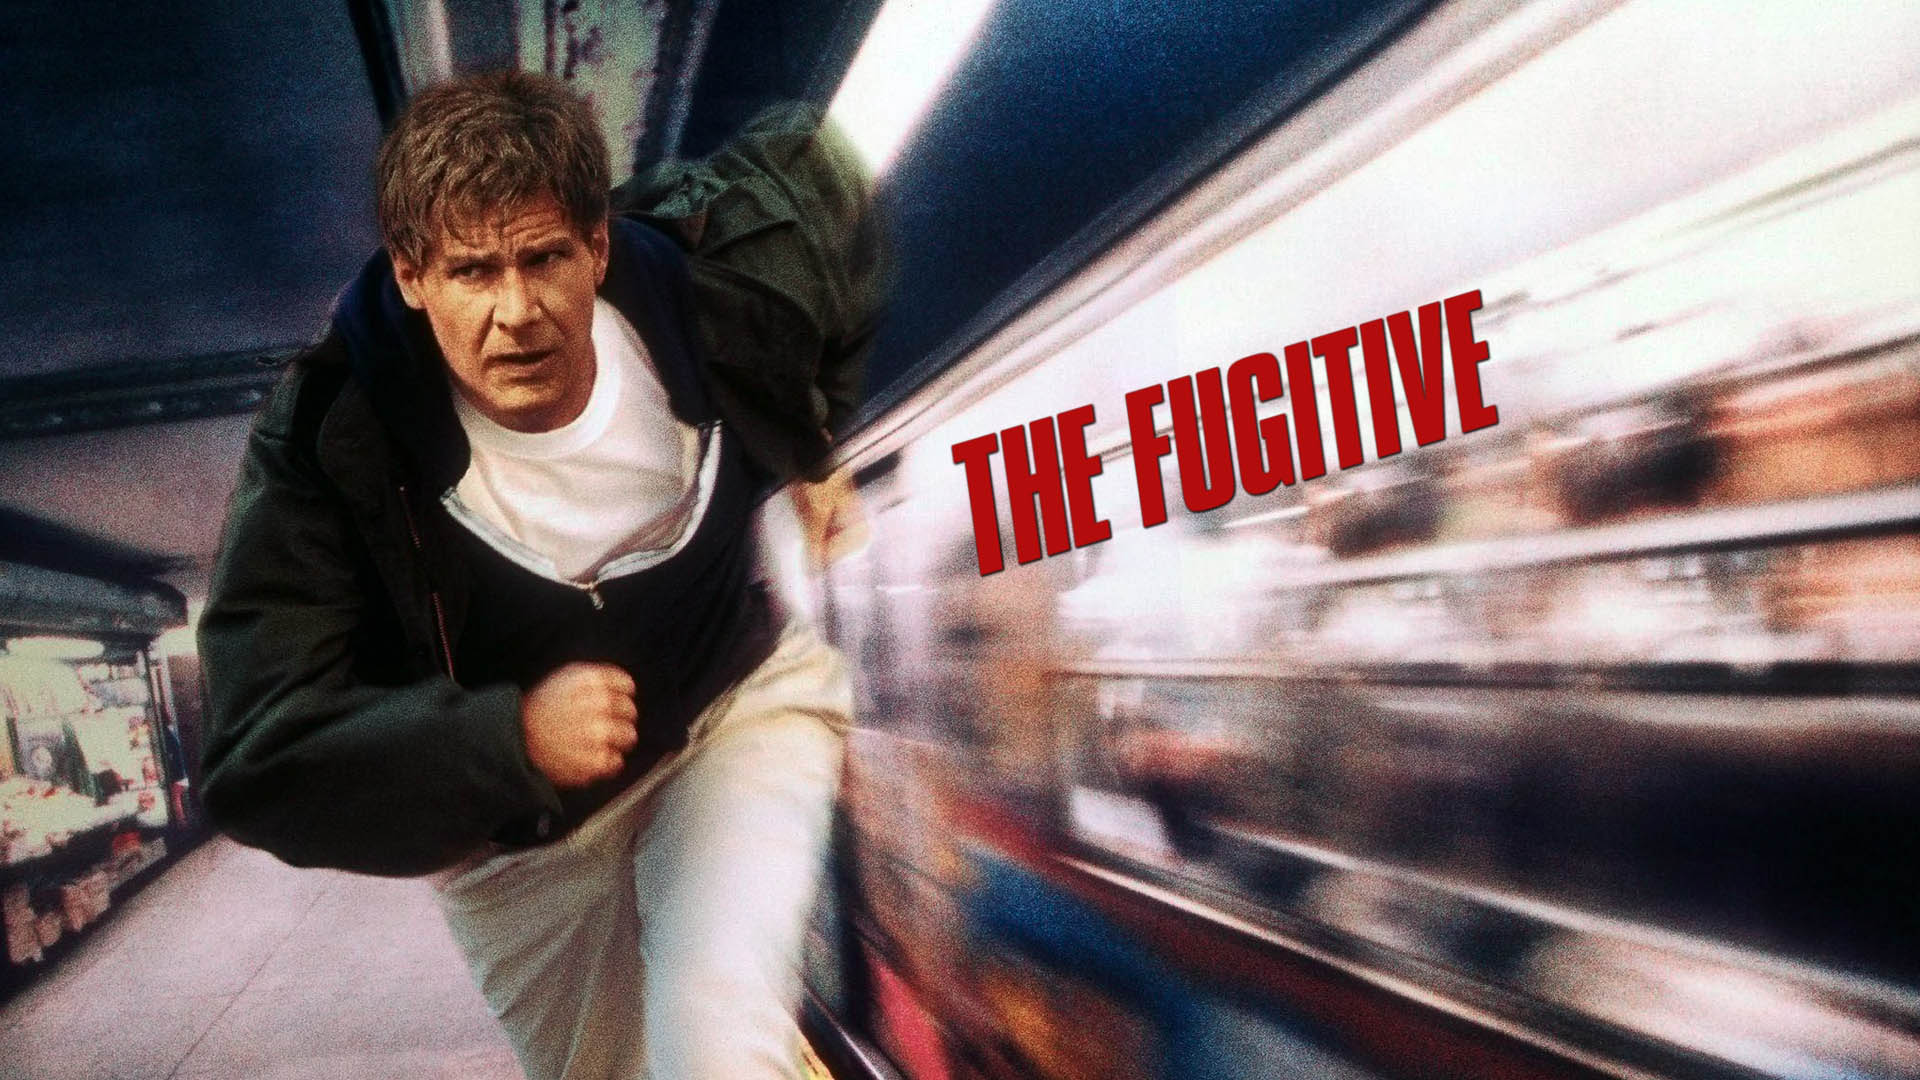 Watch The Fugitive Online | Stream Full Movies